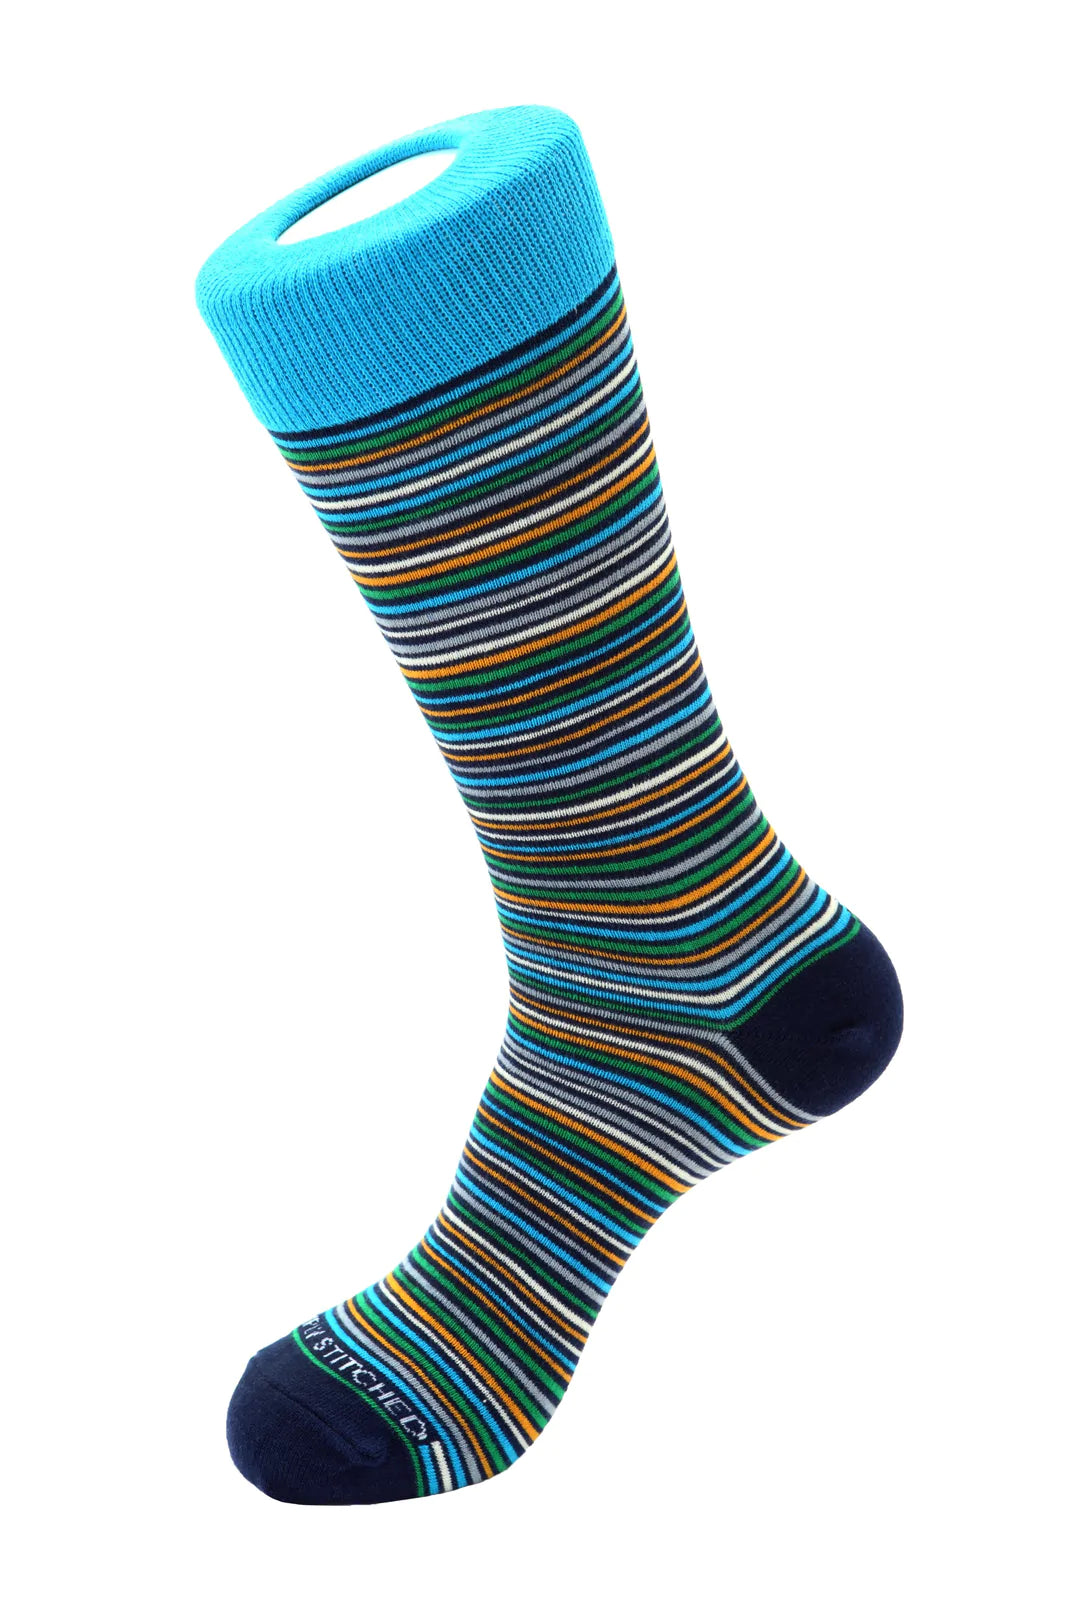 Unsimply Stitched socks with white, blue, yellow, and green stripes, making it a great pairing with DFR89 blue denim jeans and a fun Sugar sport shirt.